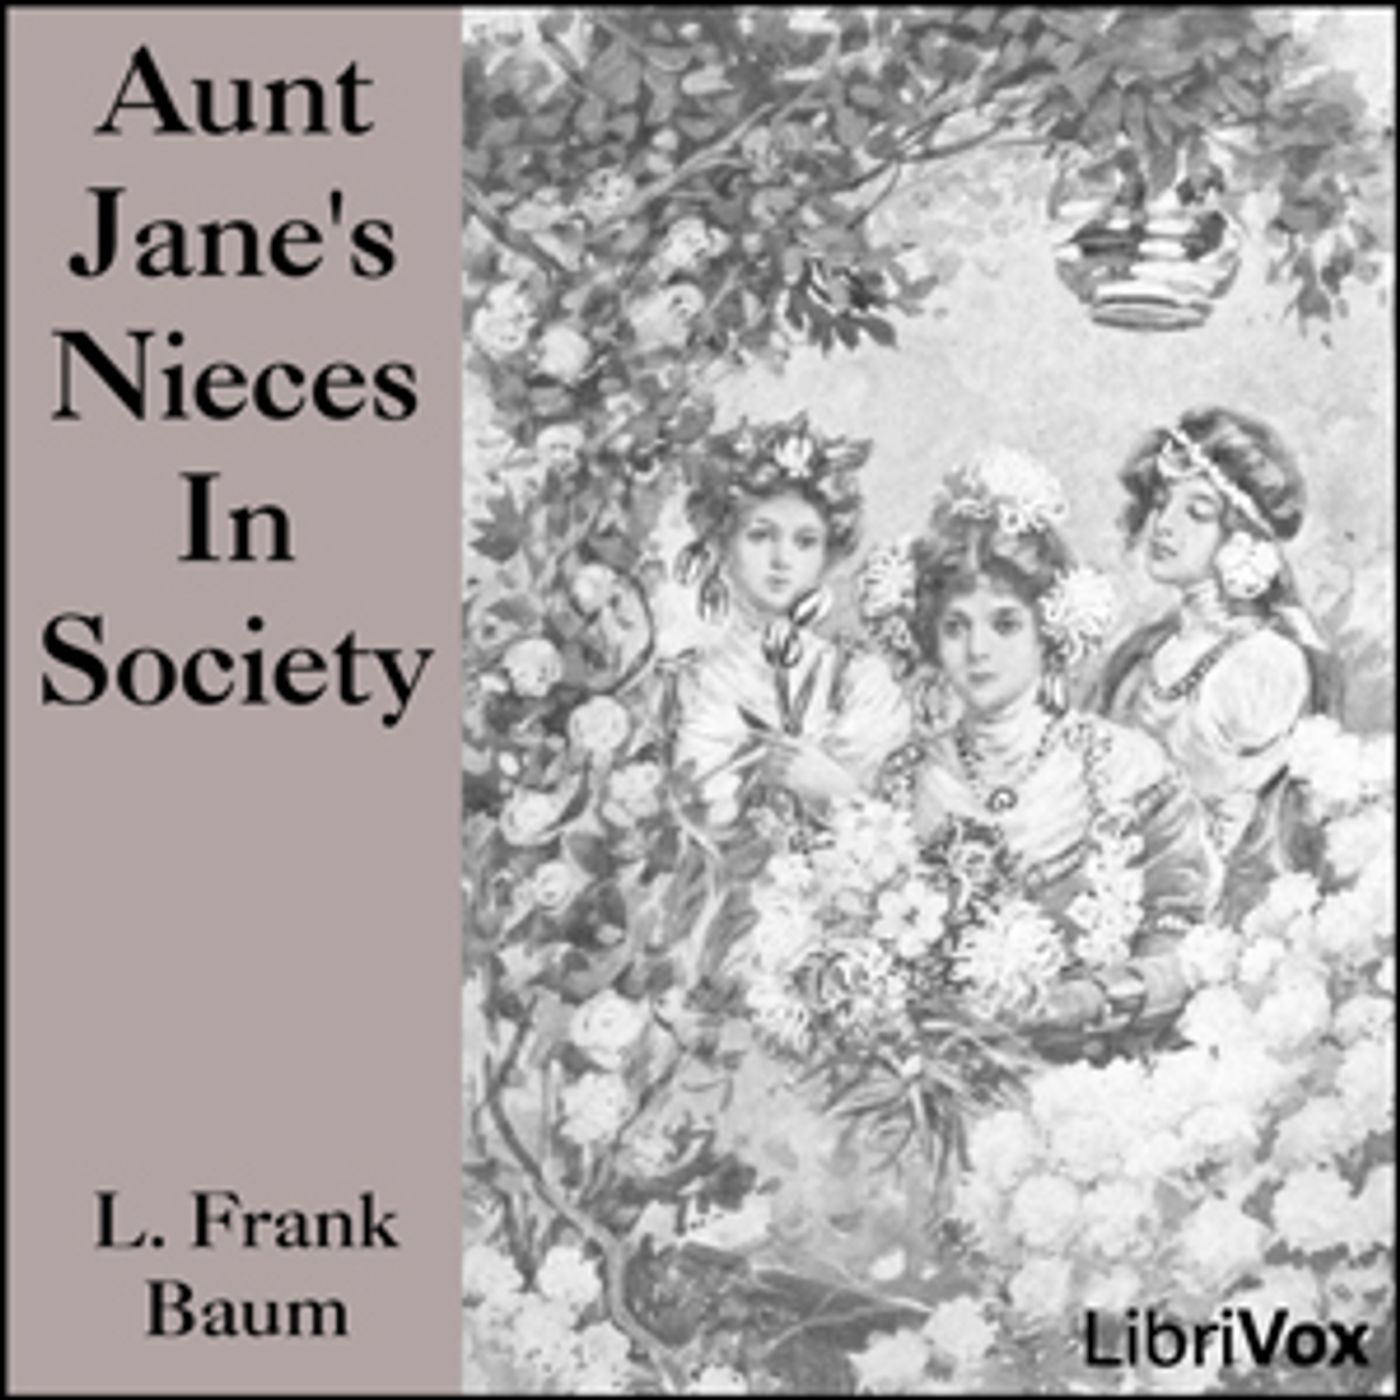 Aunt Jane’s Nieces In Society by L. Frank Baum (1856 – 1919)